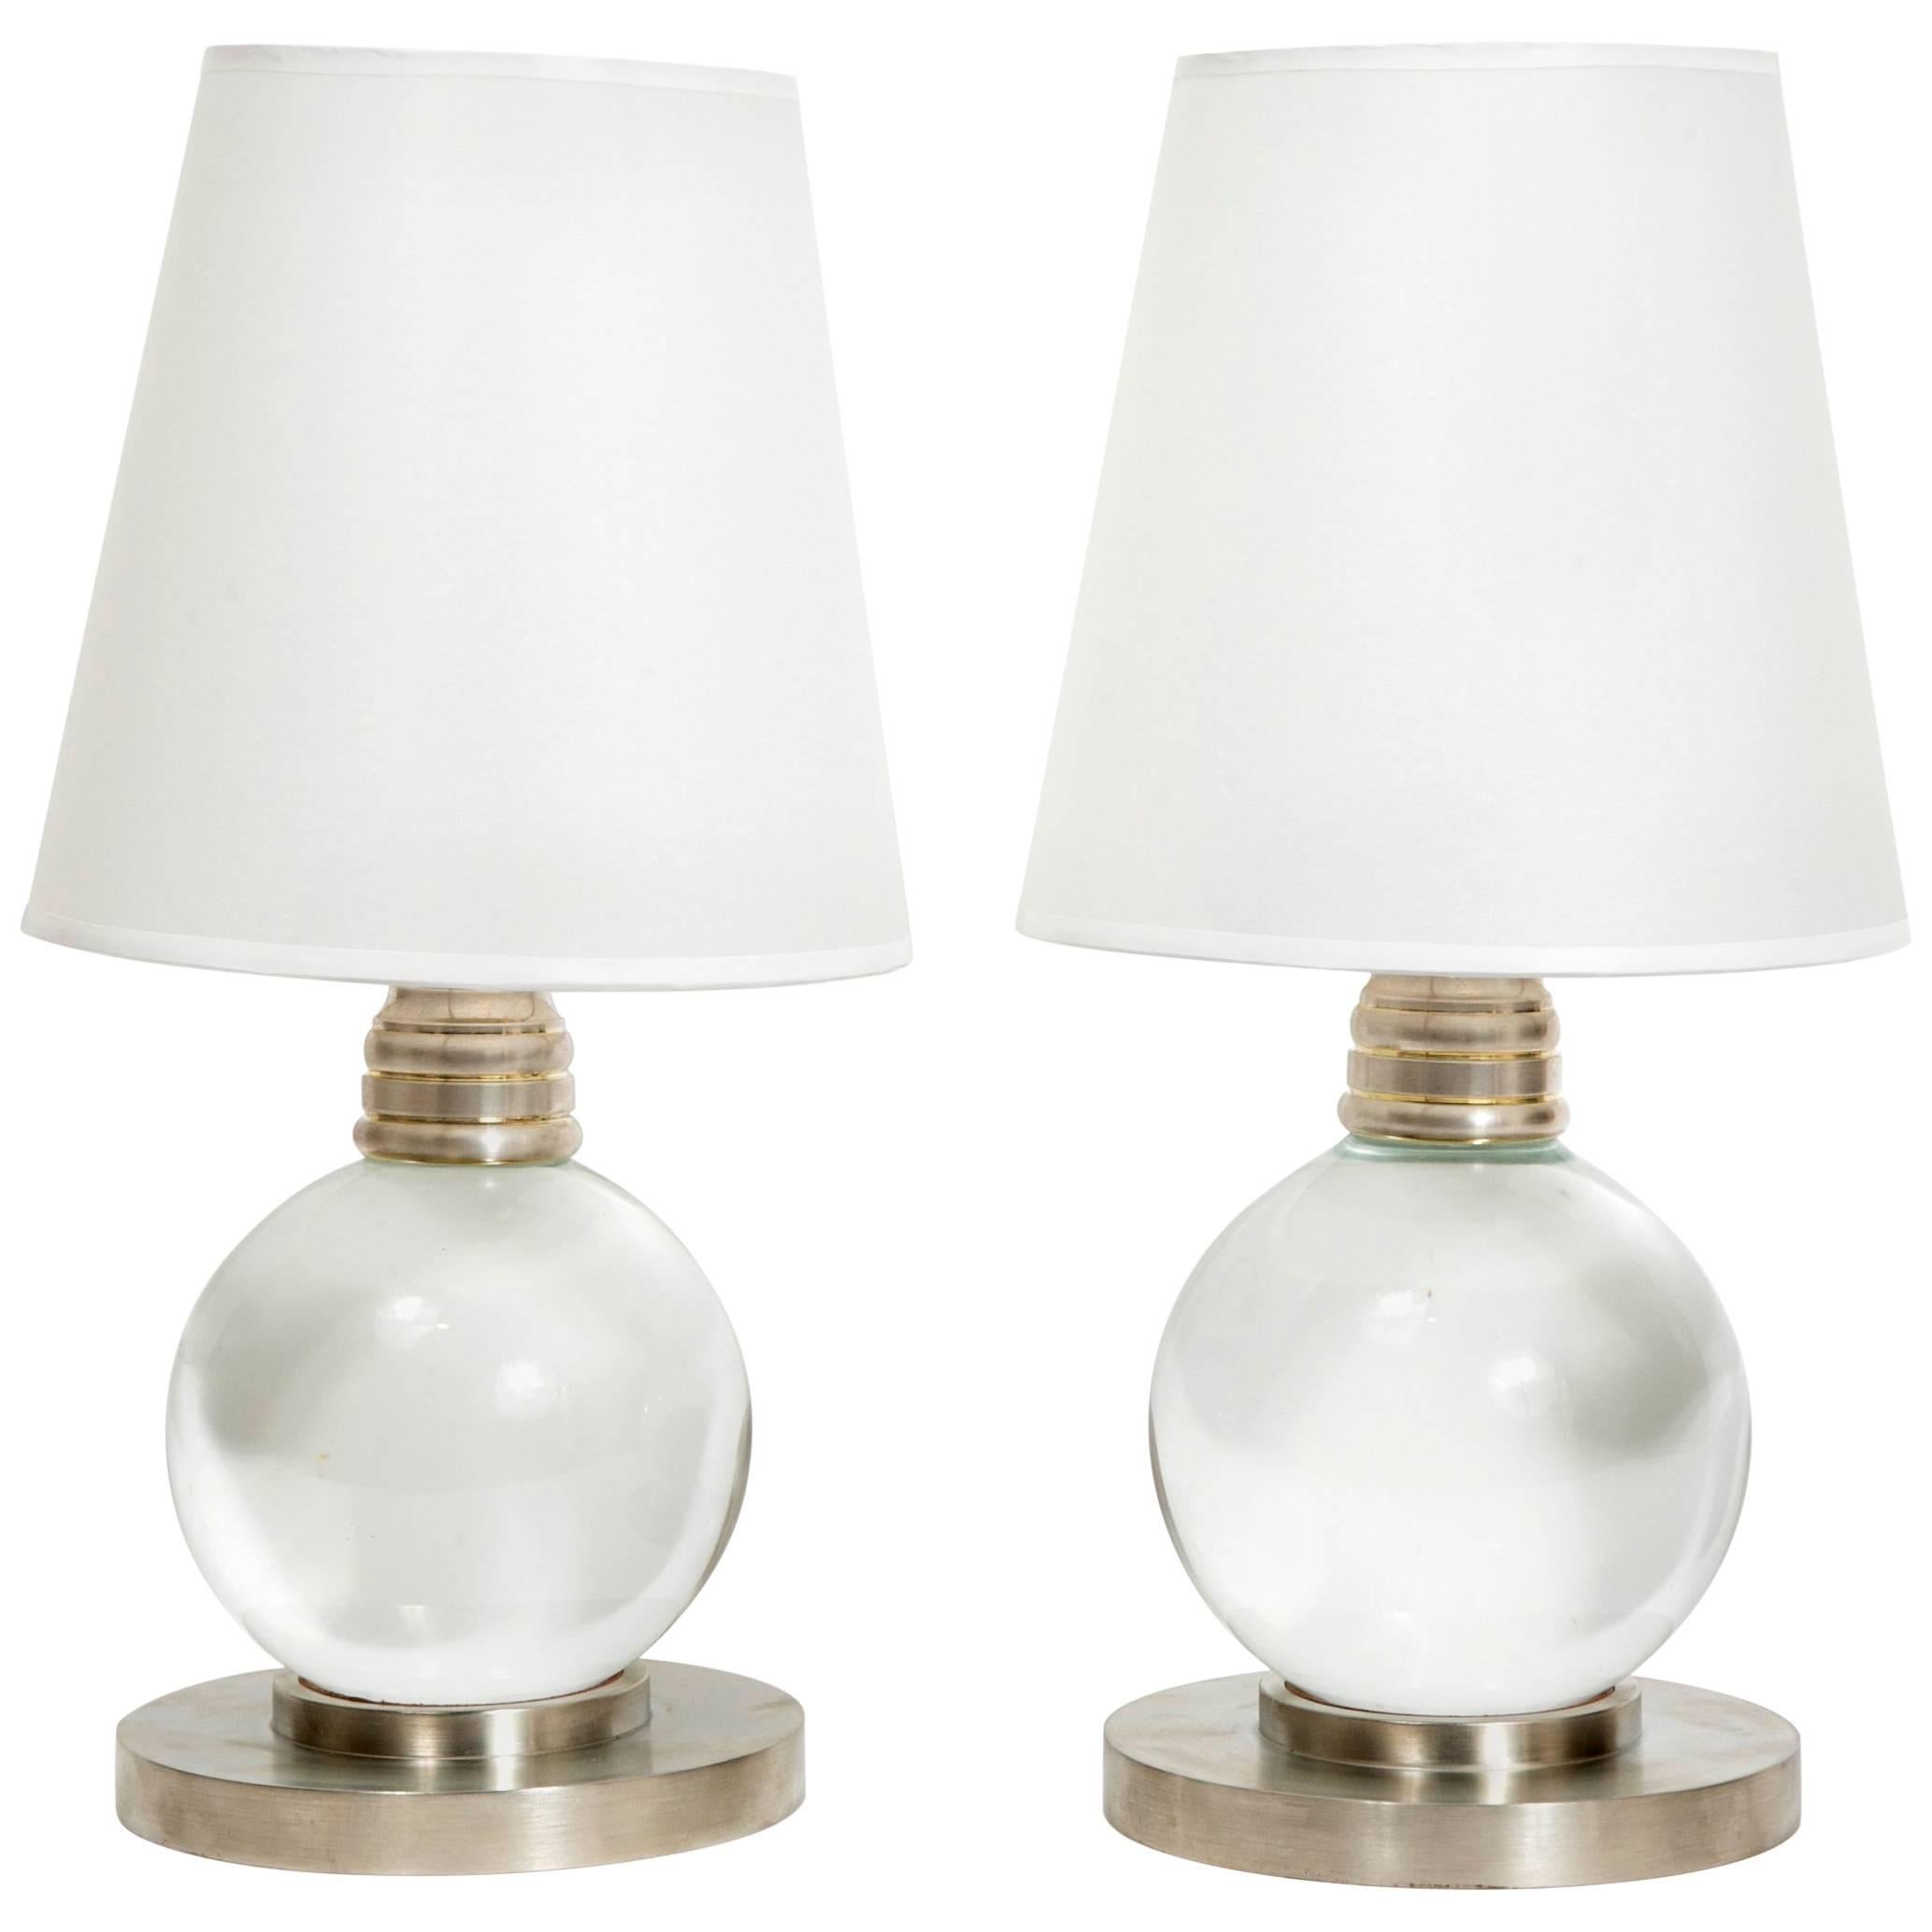 Pair of Art Deco Crystal Ball Lamps by Jacques Adnet